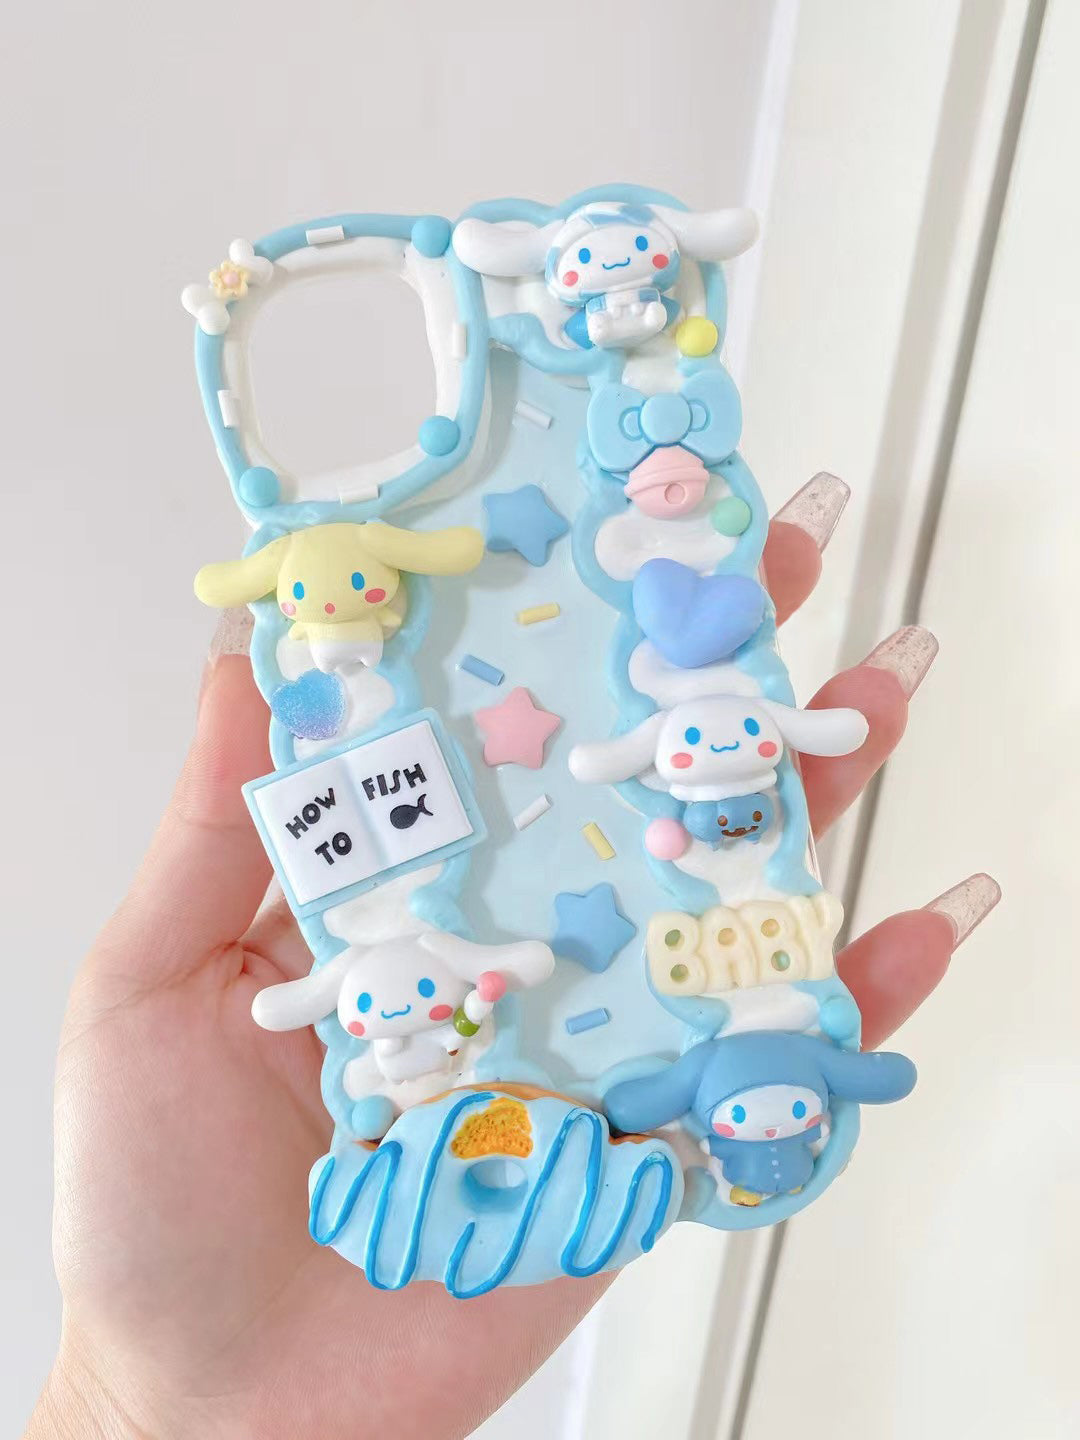 Decoden Phone Case DIY Kit Starter Package Fake Cream Decoden Materials  Charms 